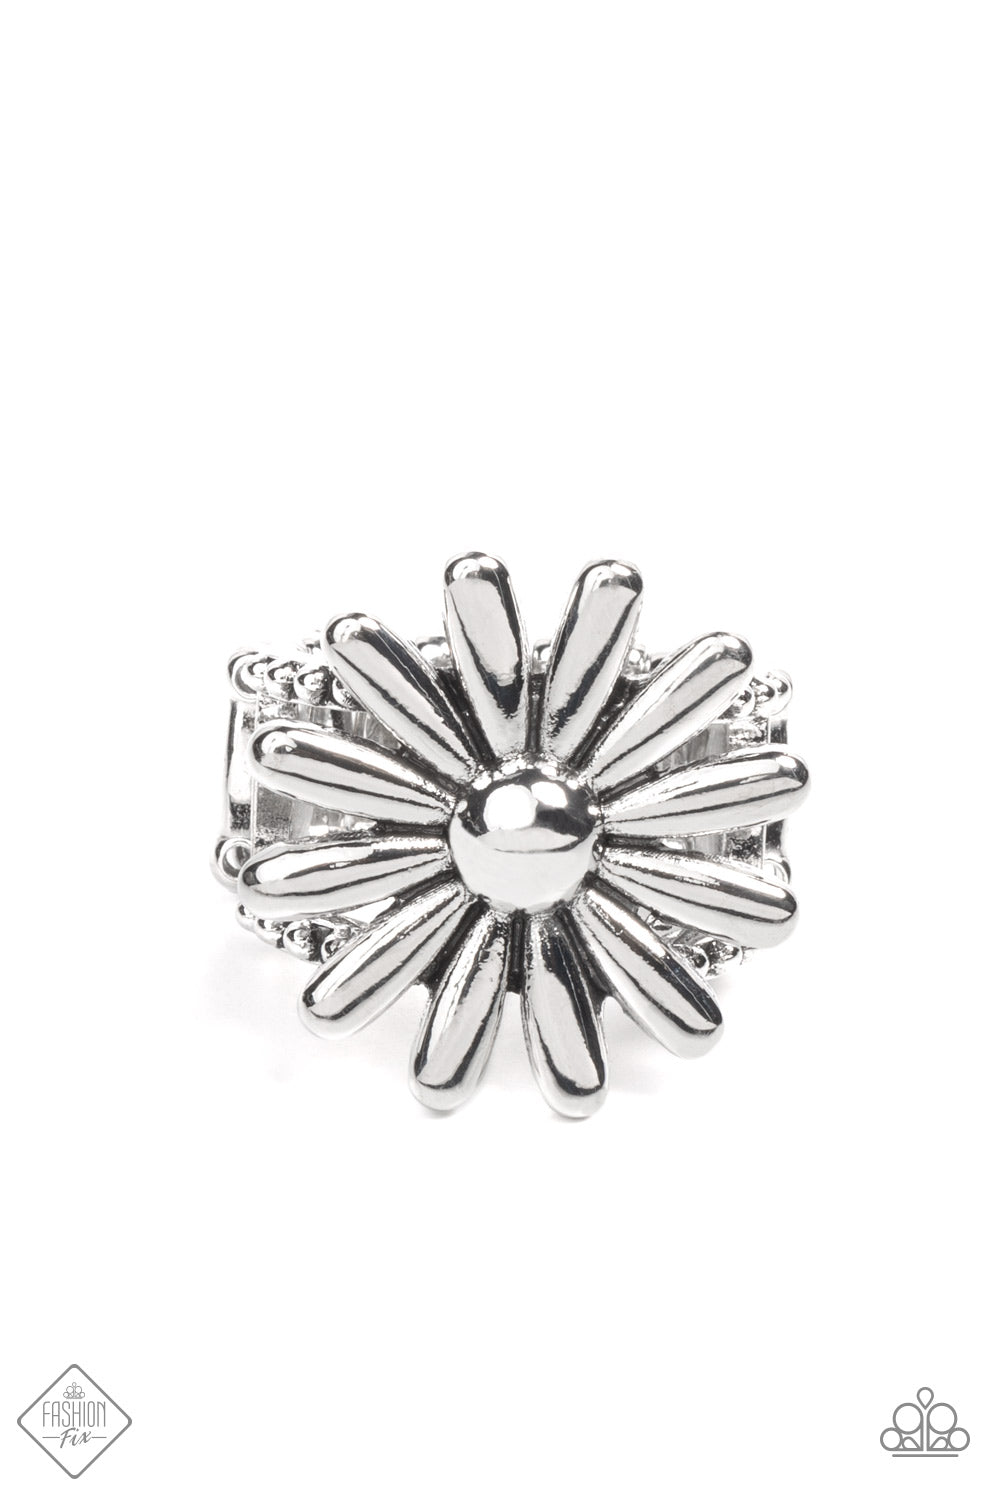 Paparazzi Accessories - GROWING Steady - Silver Ring